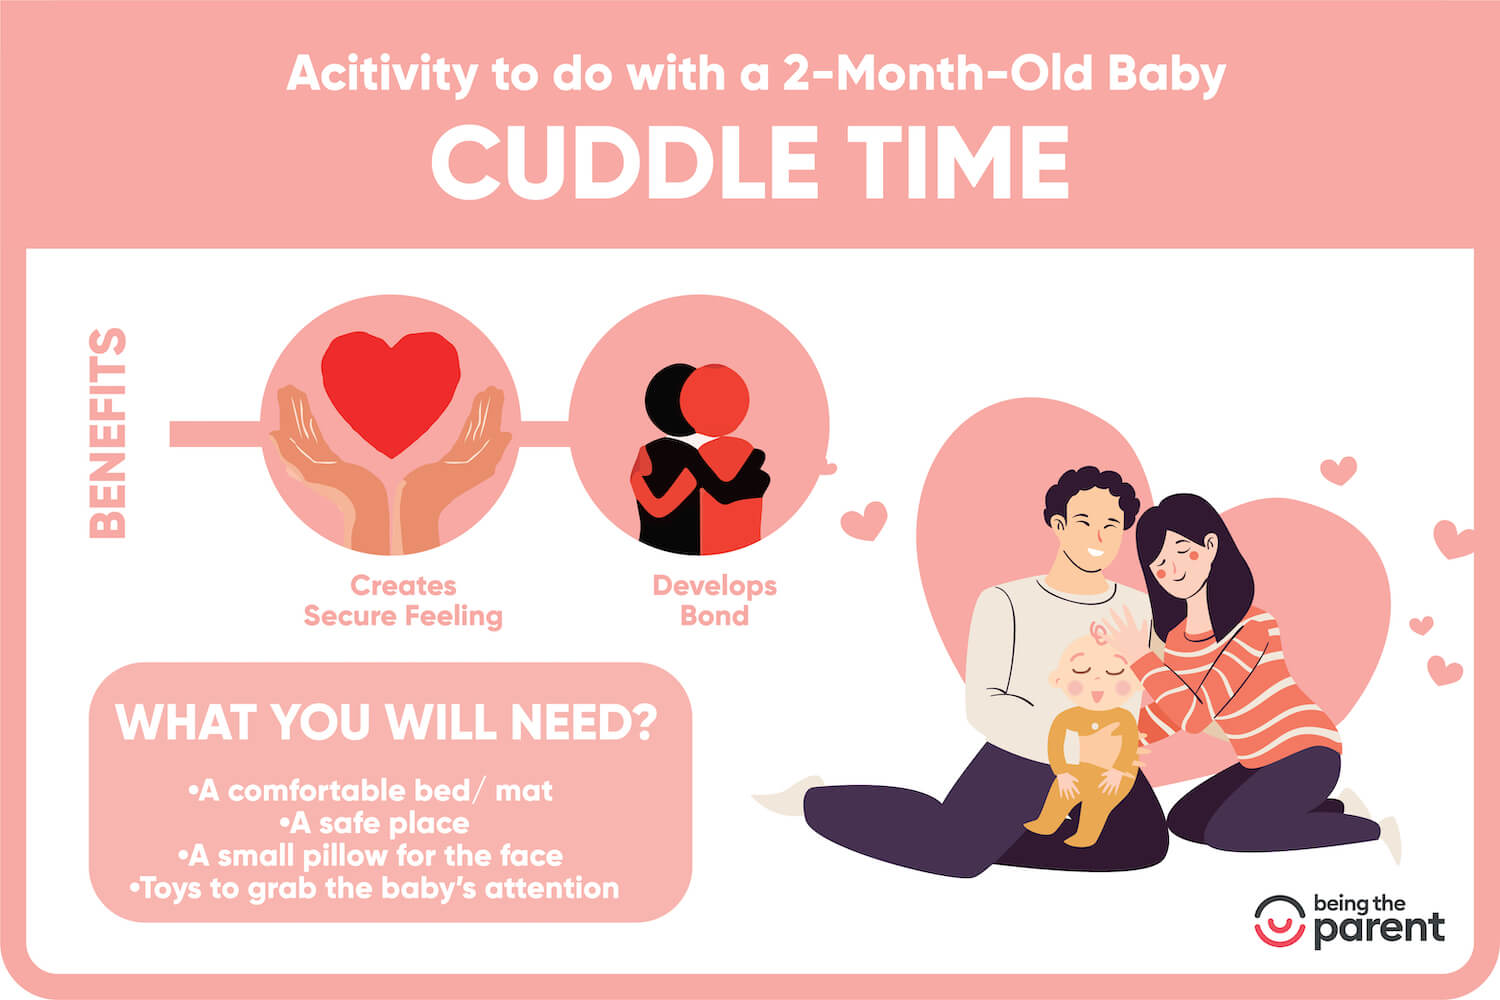 cuddle time -Activities For A 2 Month Old Baby